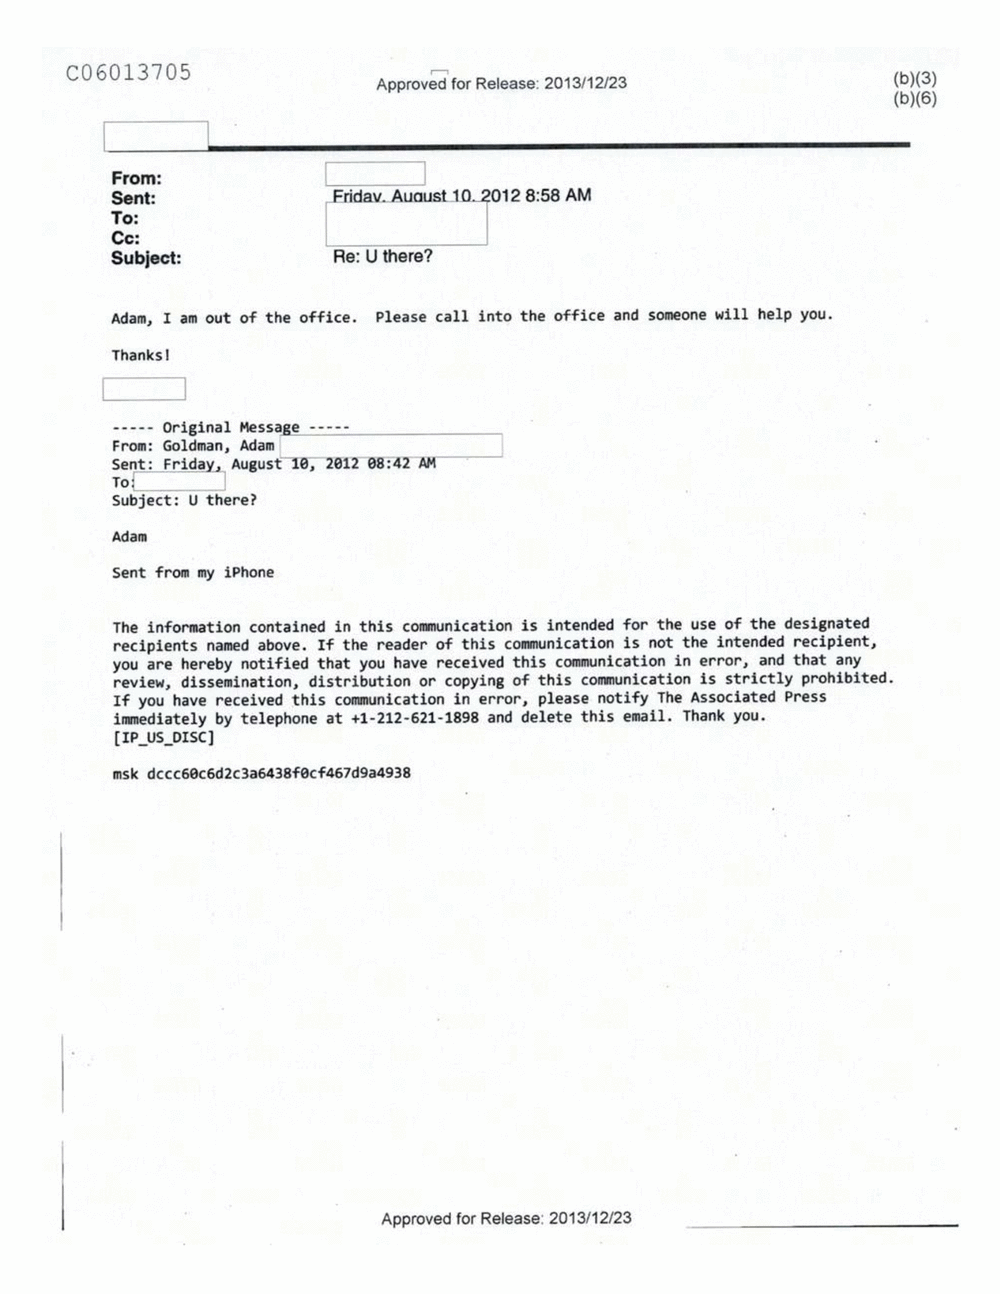 Page 565 from Email Correspondence Between Reporters and CIA Flacks